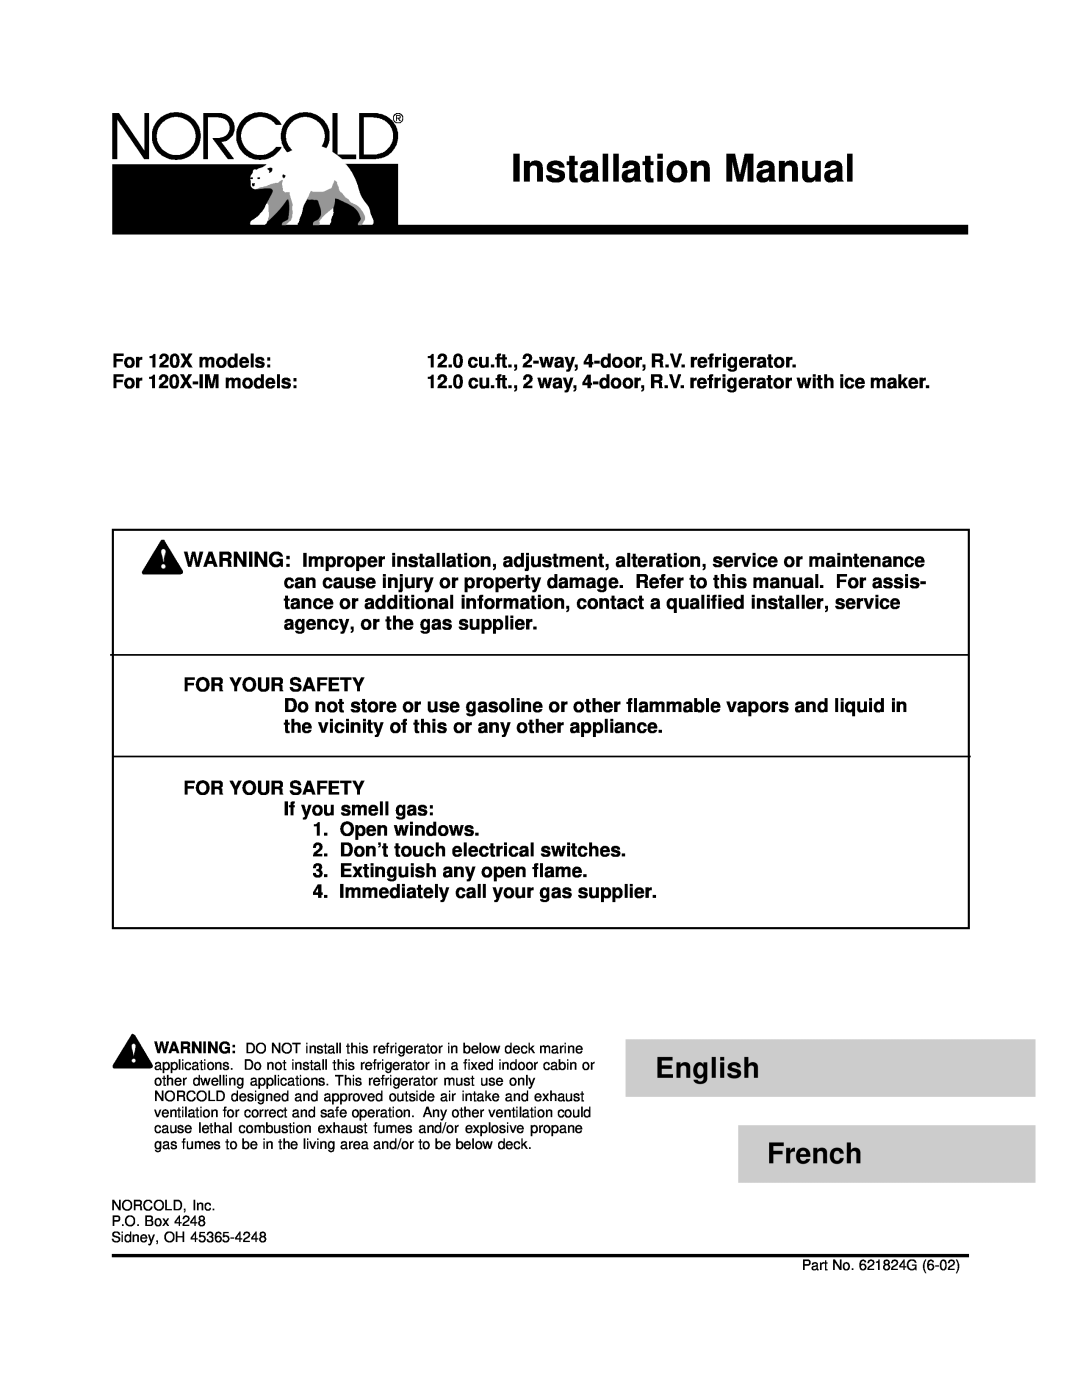 Norcold 120x owner manual English, French 